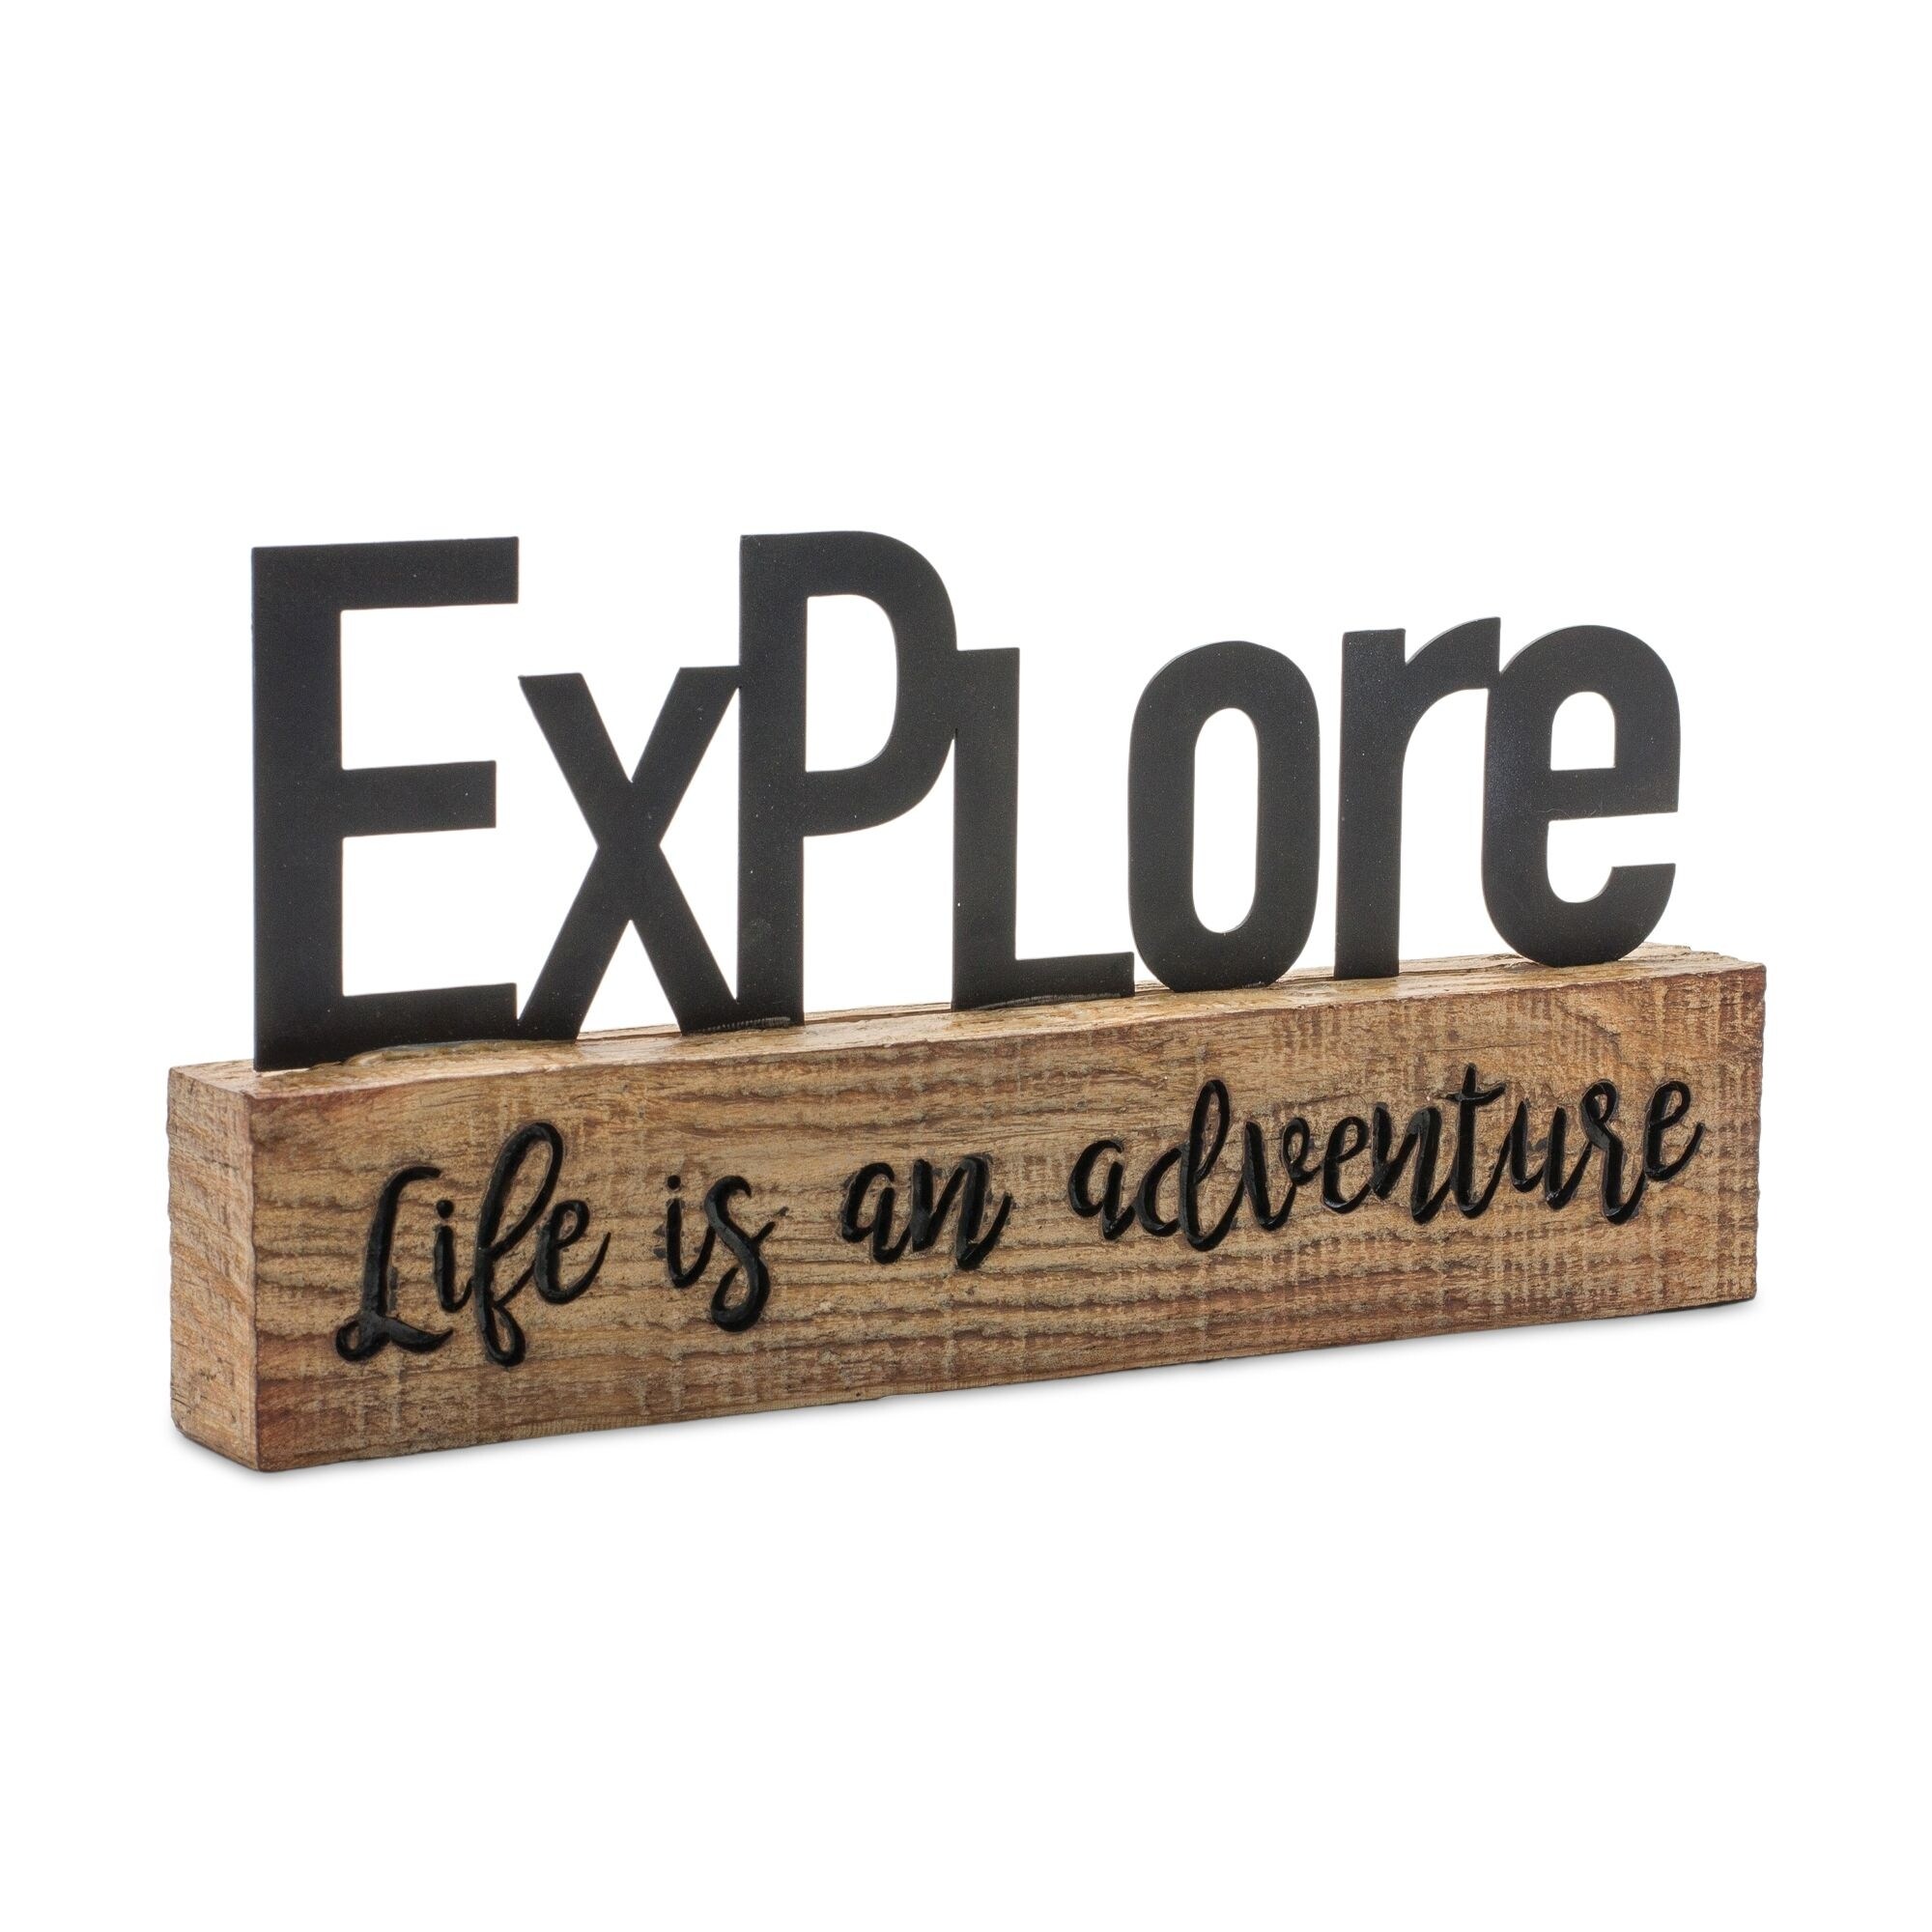 Set of 2 "Welcome Explore" Tabletop Signs 9"